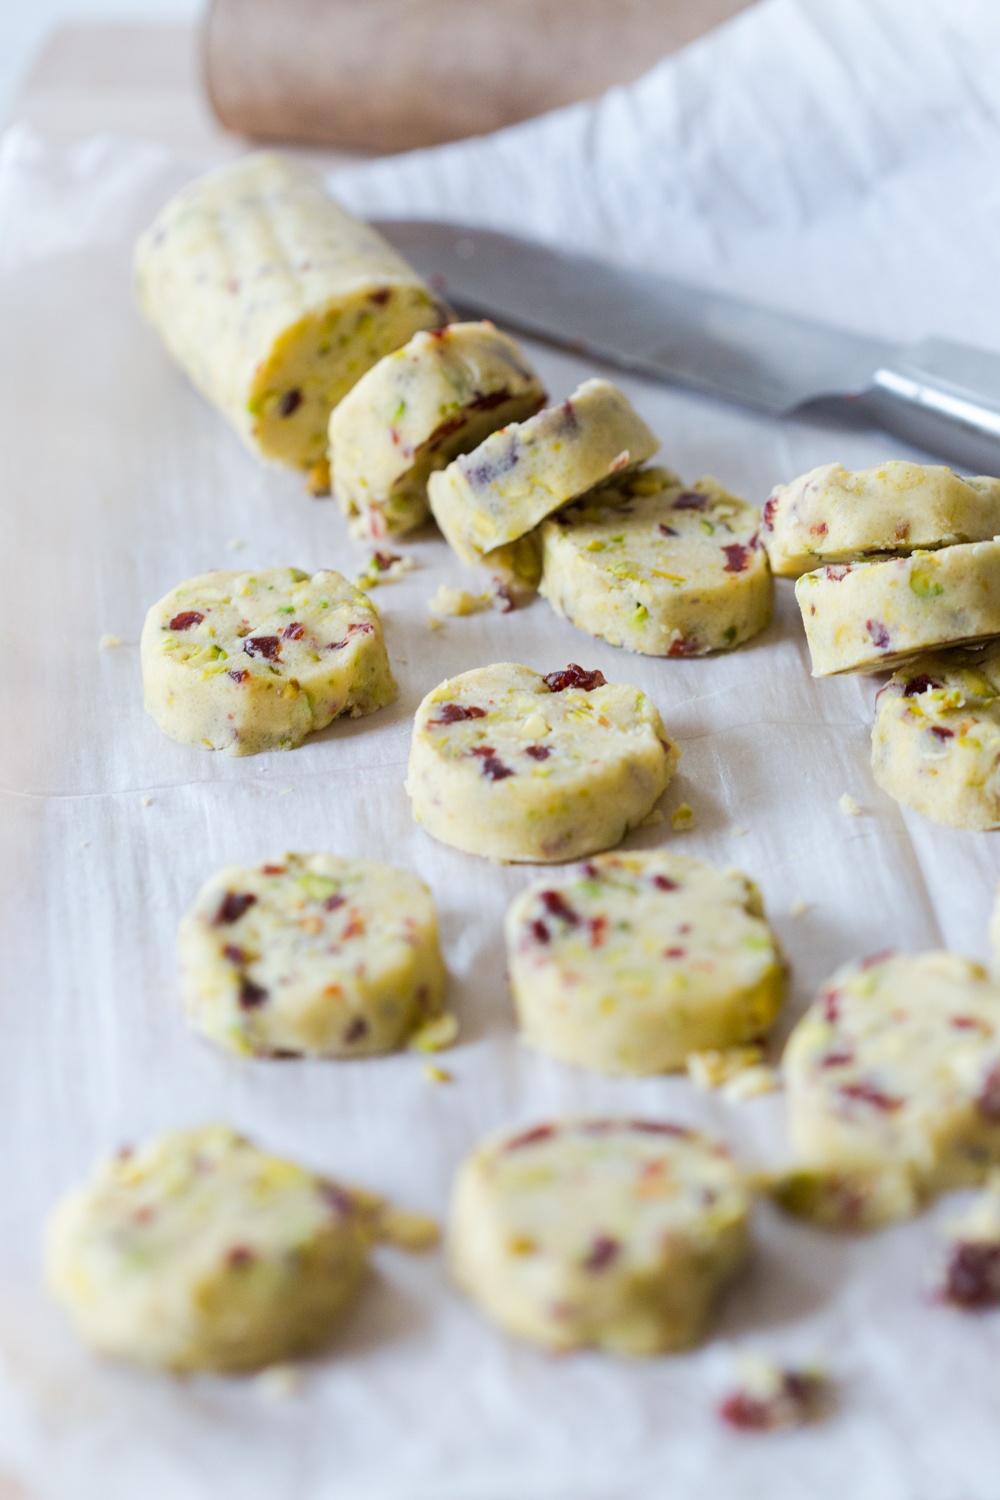 Cherry Pistachio and White Chocolate Shortbread Cookies - slice and bake